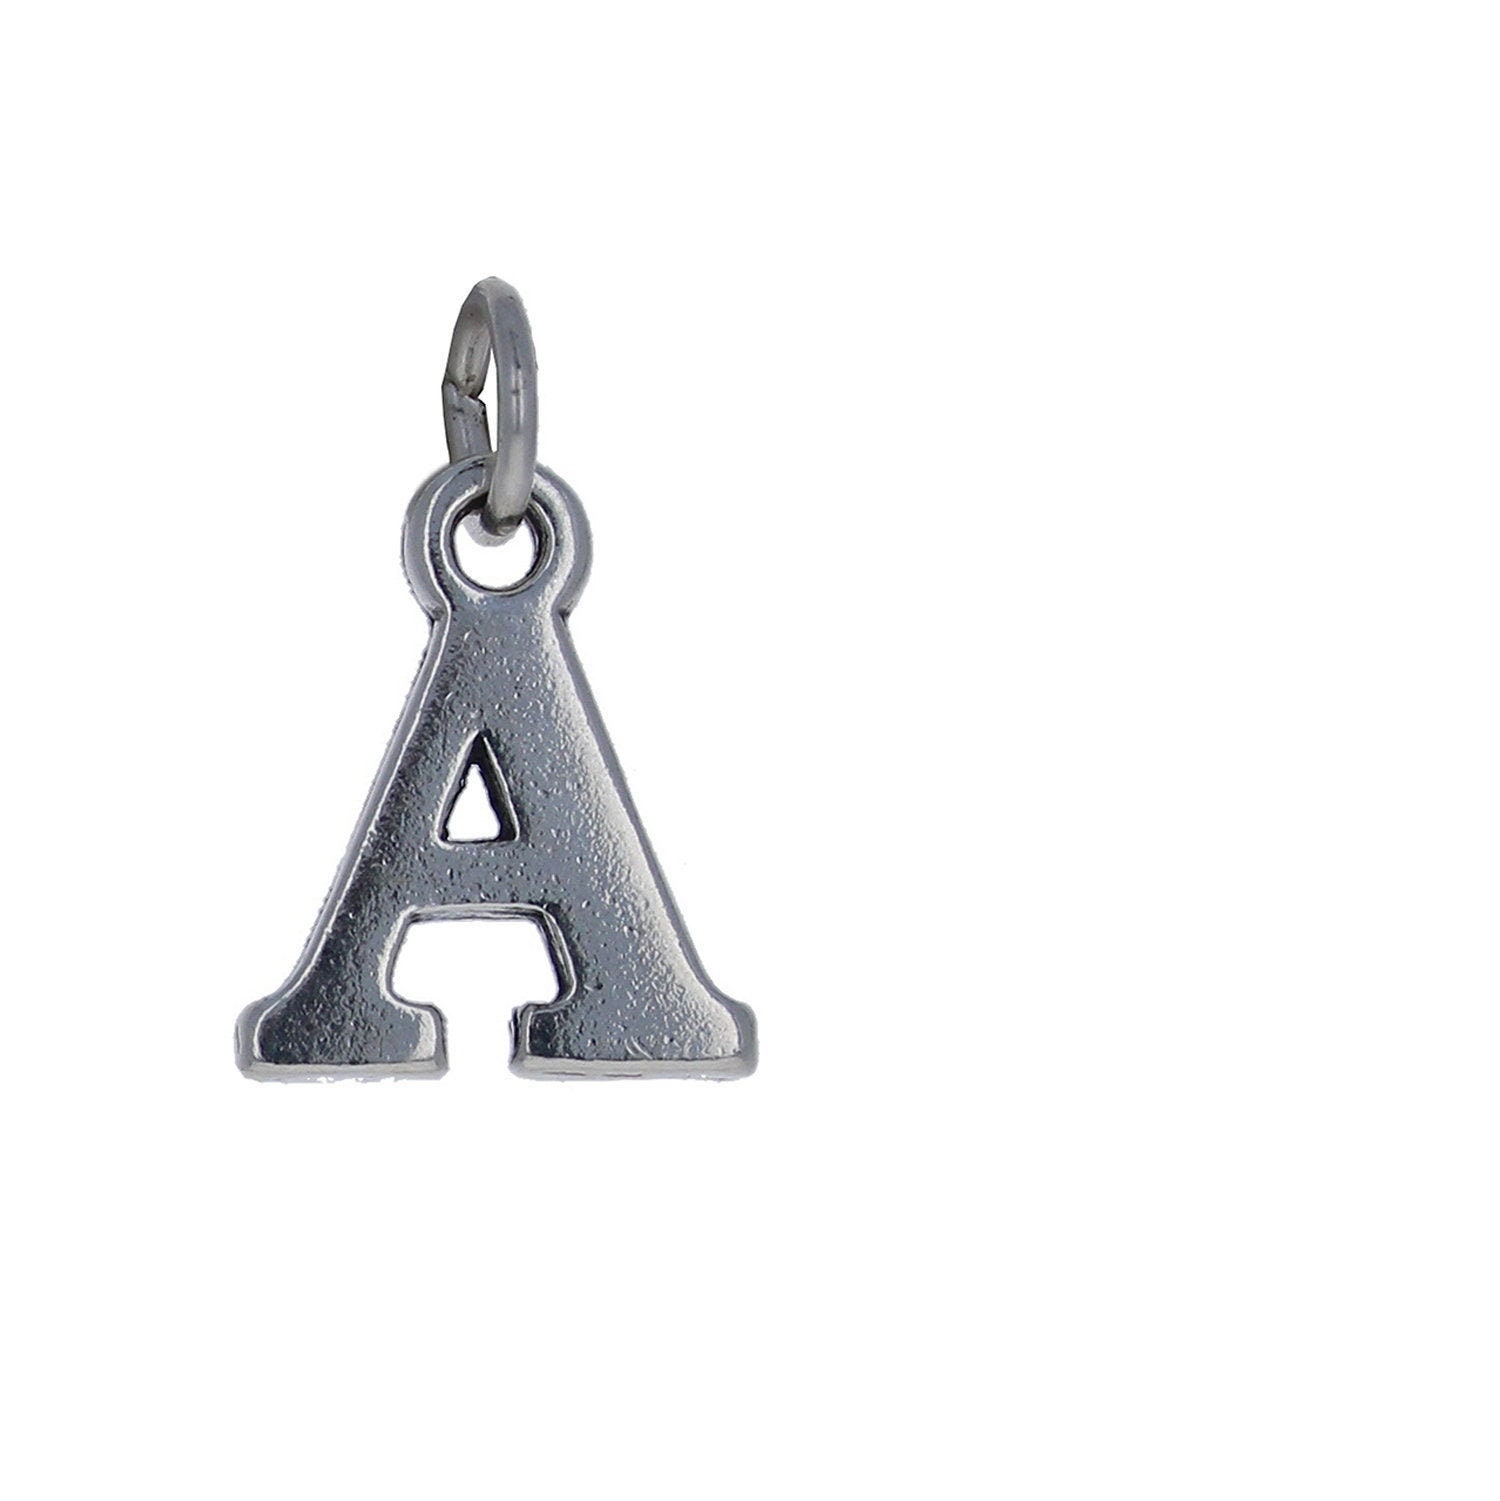 Mandala Crafts Capital Letter Charms for Jewelry Making - Alphabet Charms  Letters for Jewelry Making - AZ Letter Charms Initial Charms for Bracelet  Necklace